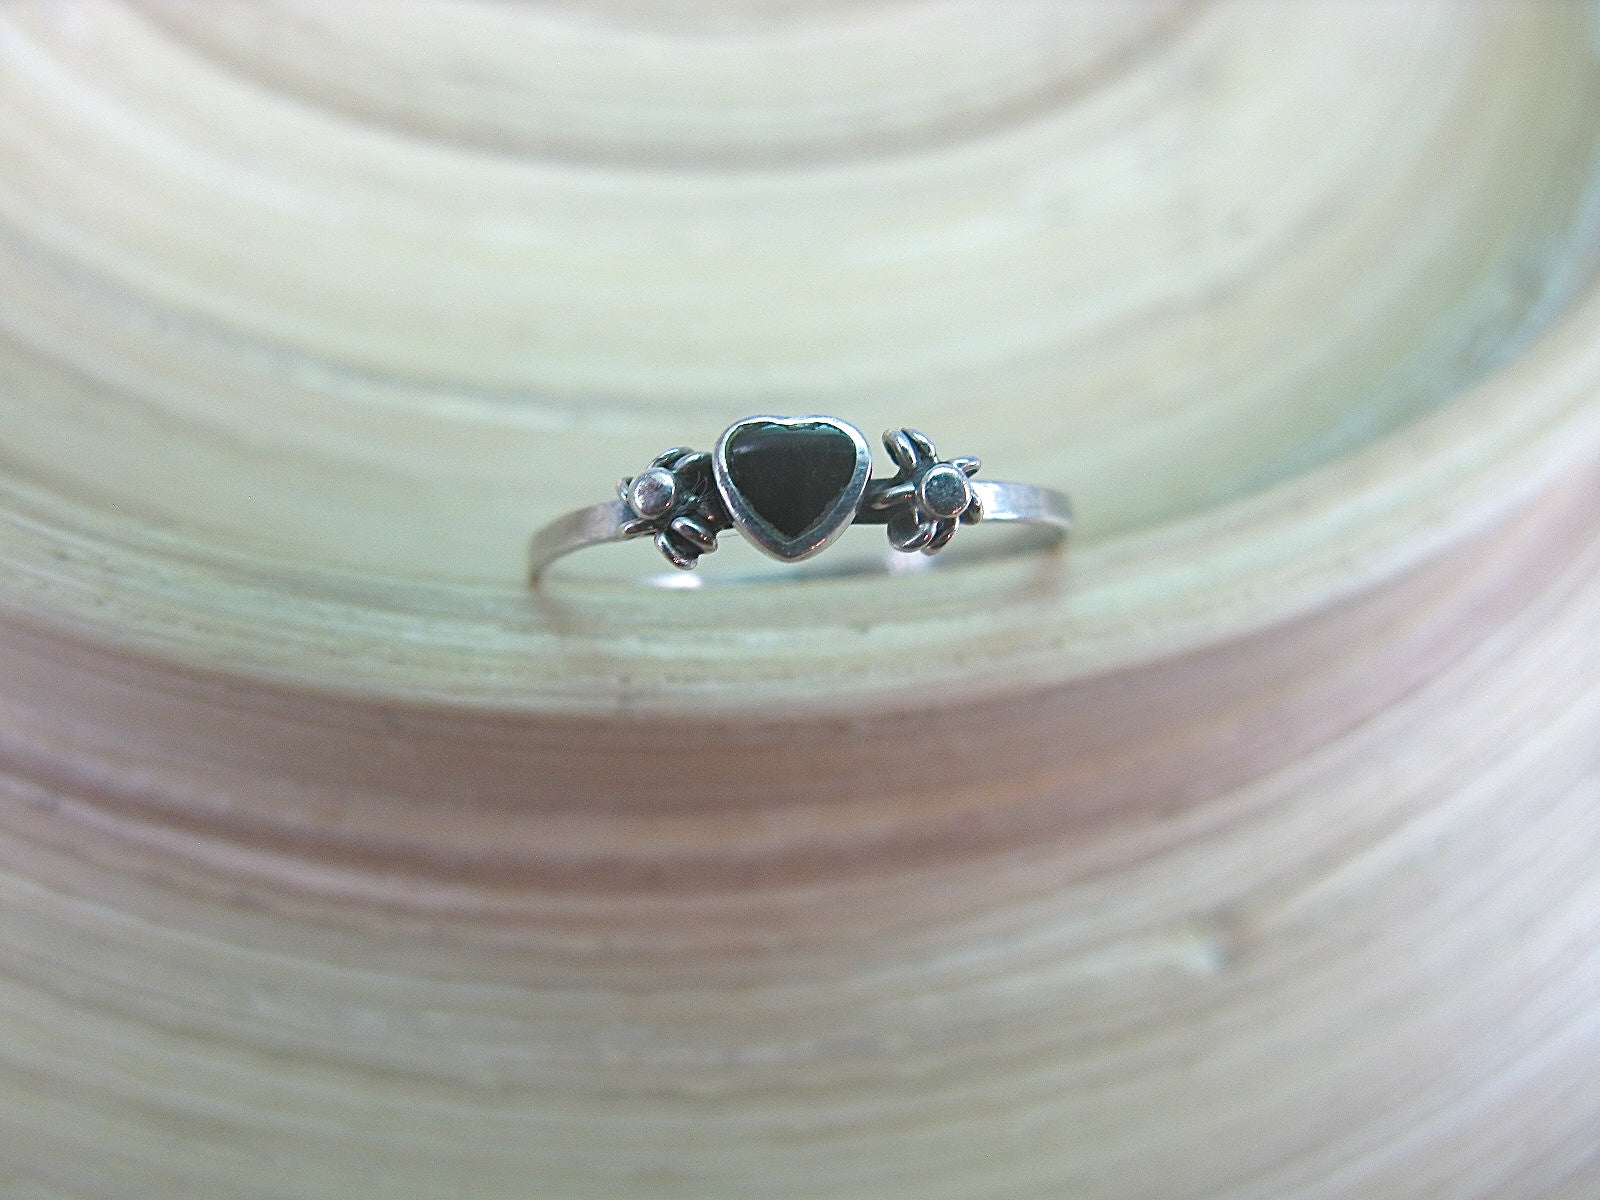 Onyx Heart Ring Minimalist Jewelry in 925 Sterling Silver Ring Faith Owl - Faith Owl